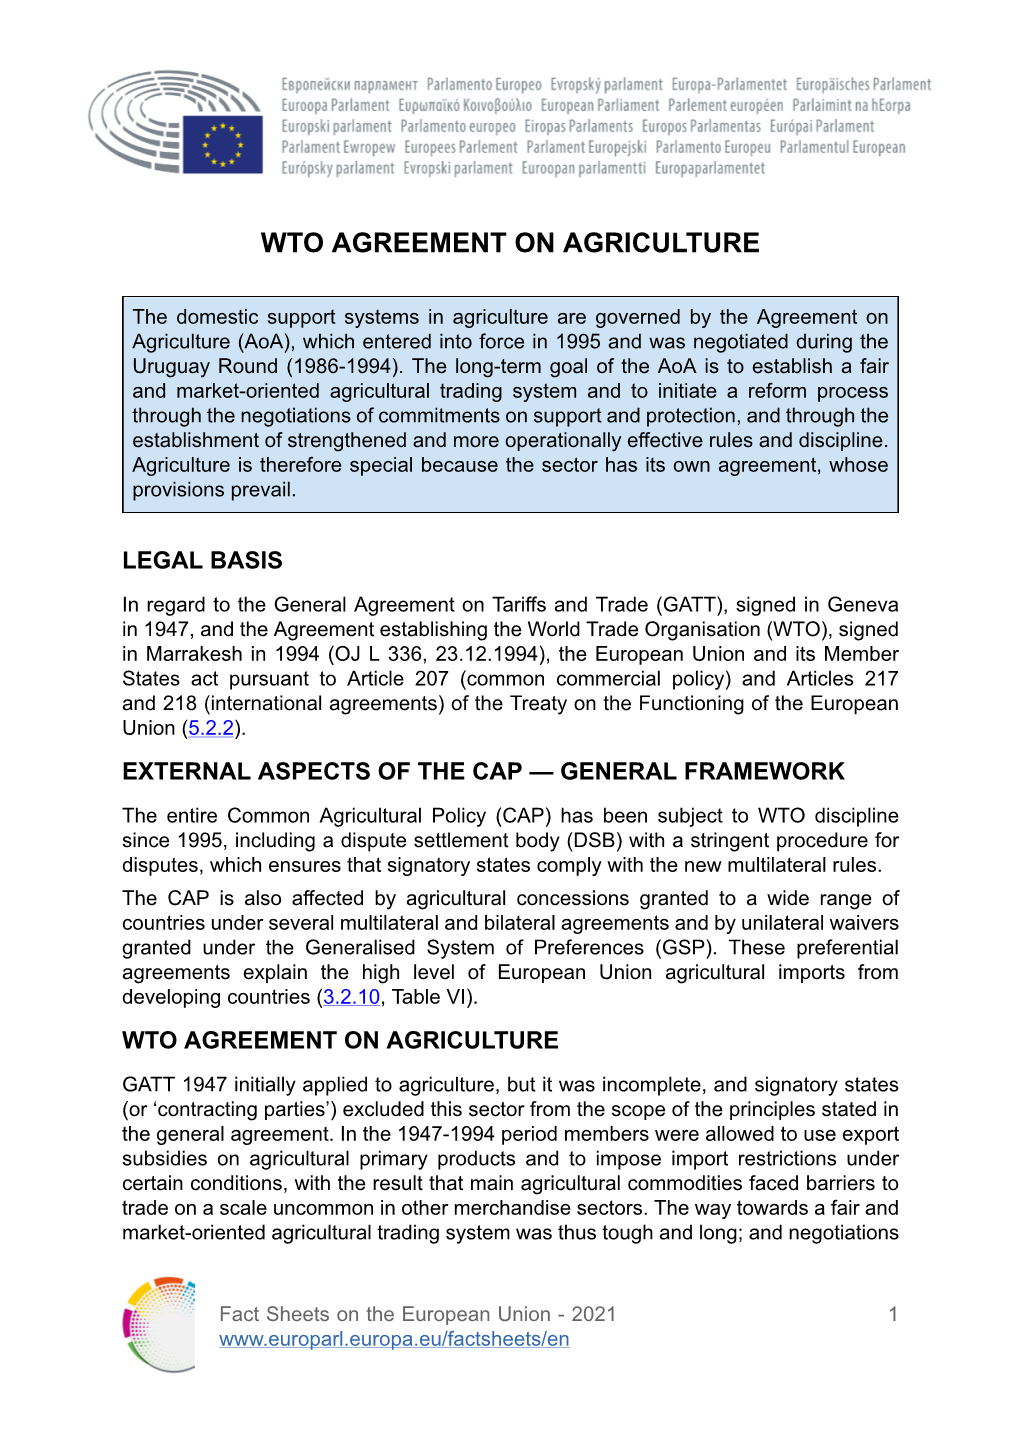 Wto Agreement on Agriculture